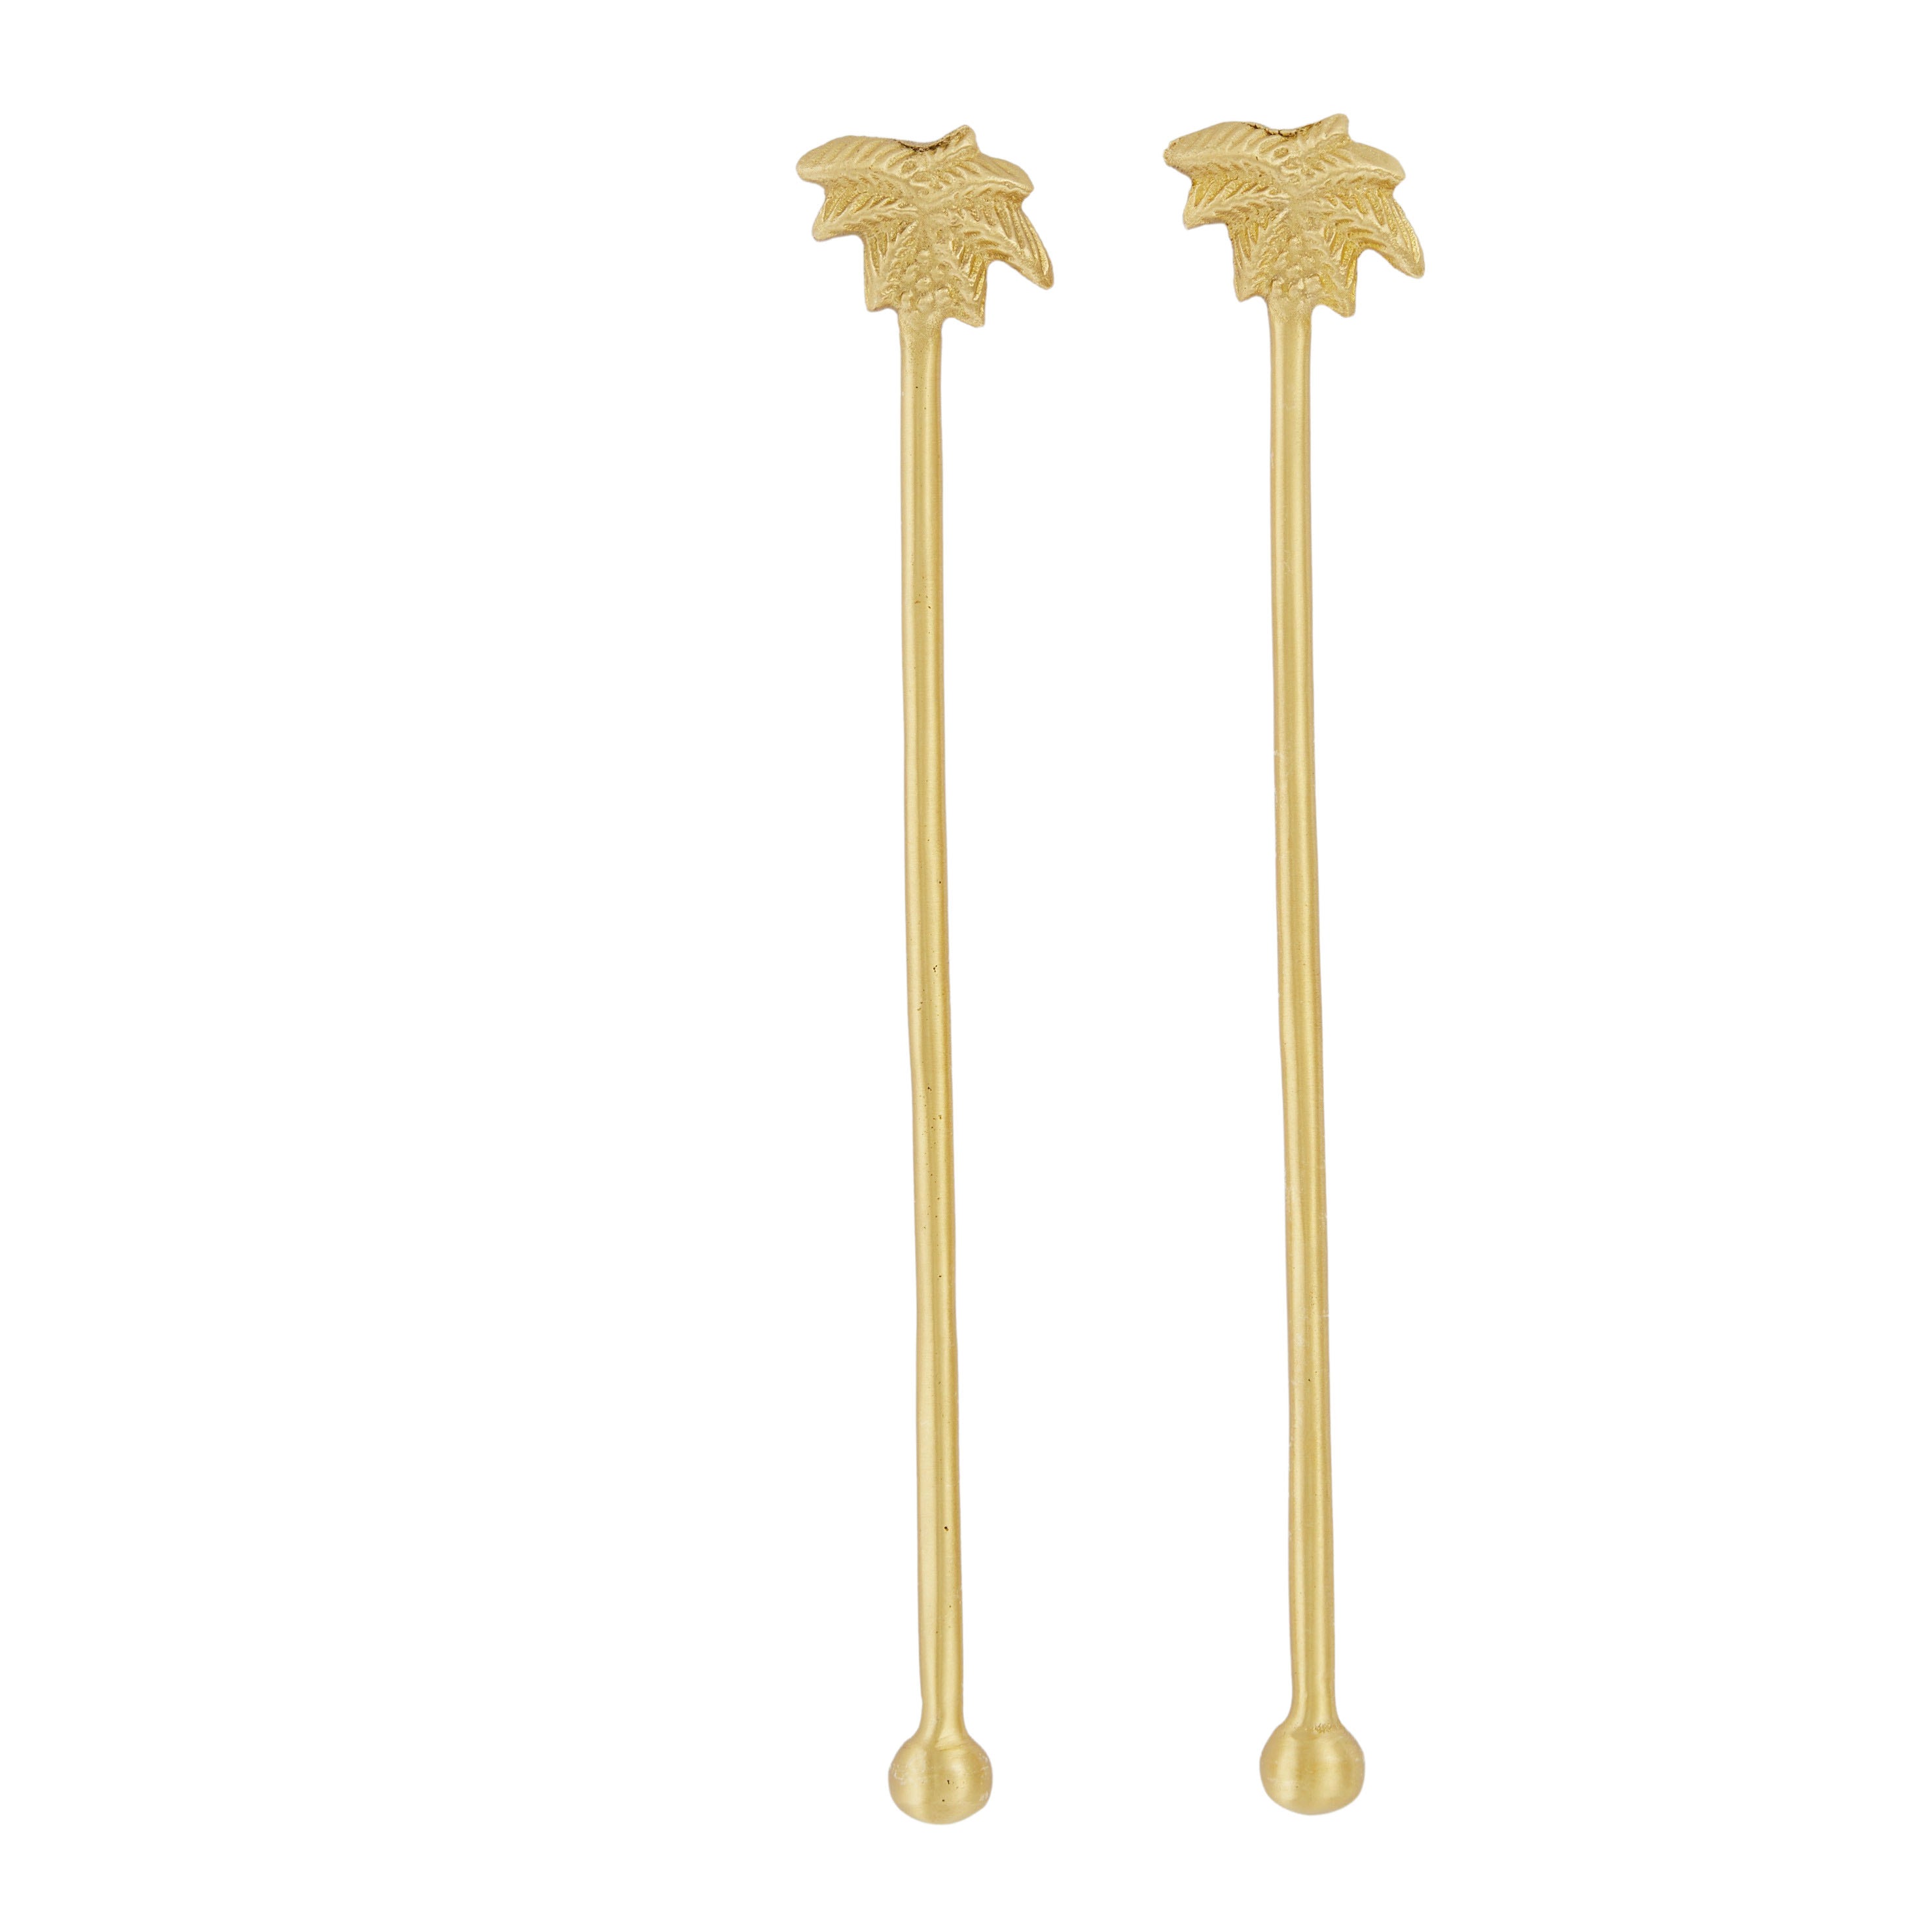 Tropic Set/2 Cocktail Stirrers-Dining & Entertaining-Coast To Coast Home-The Bay Room